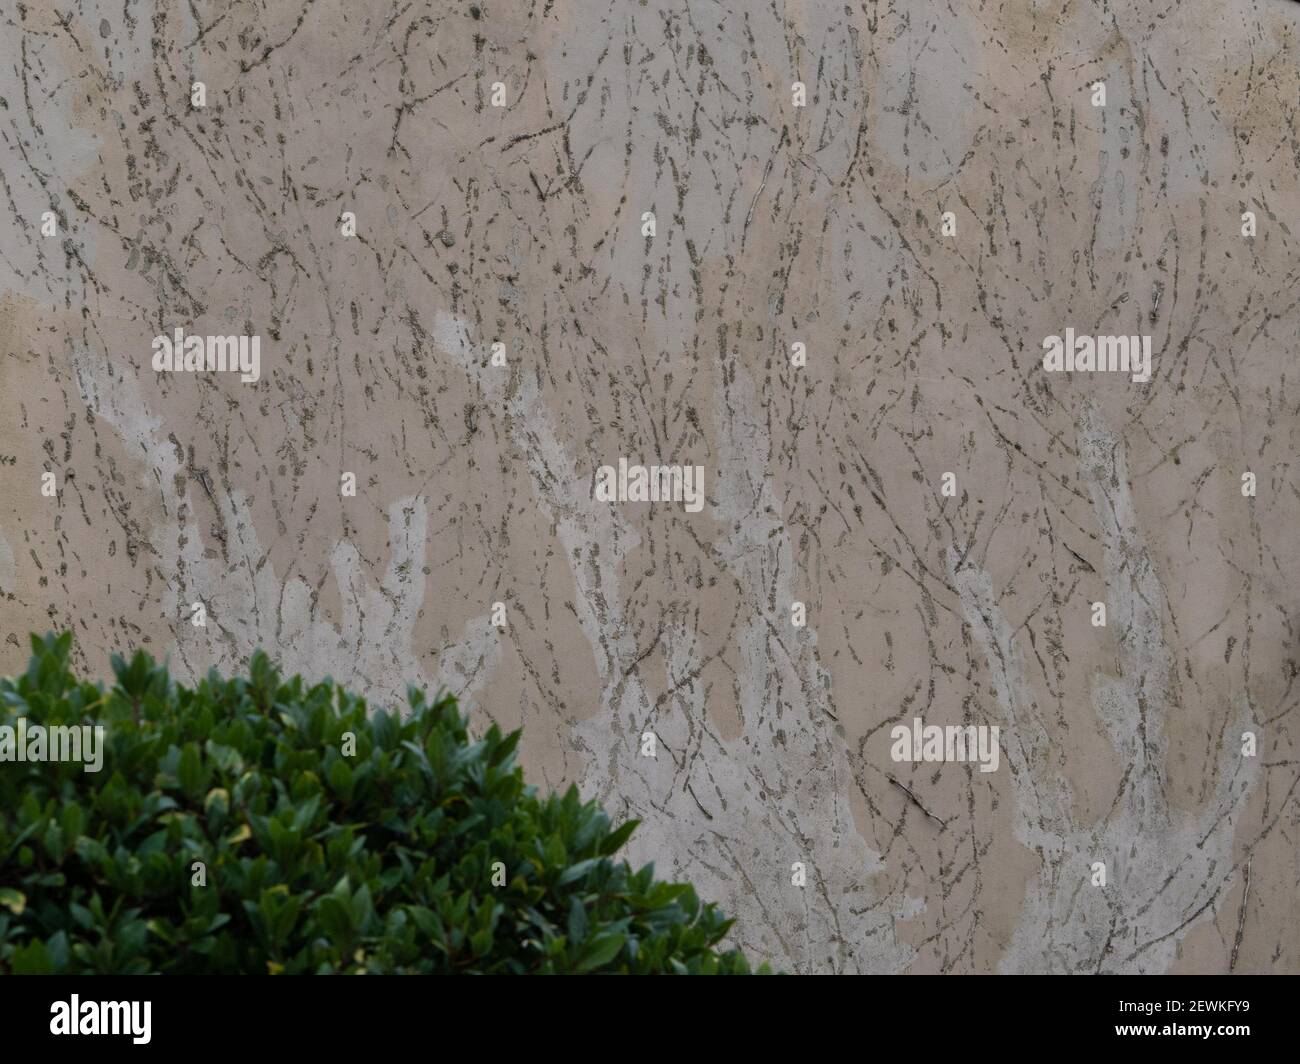 Trails of climber showing on rendered wall in Westbury, Wiltshire, England, UK. Stock Photo